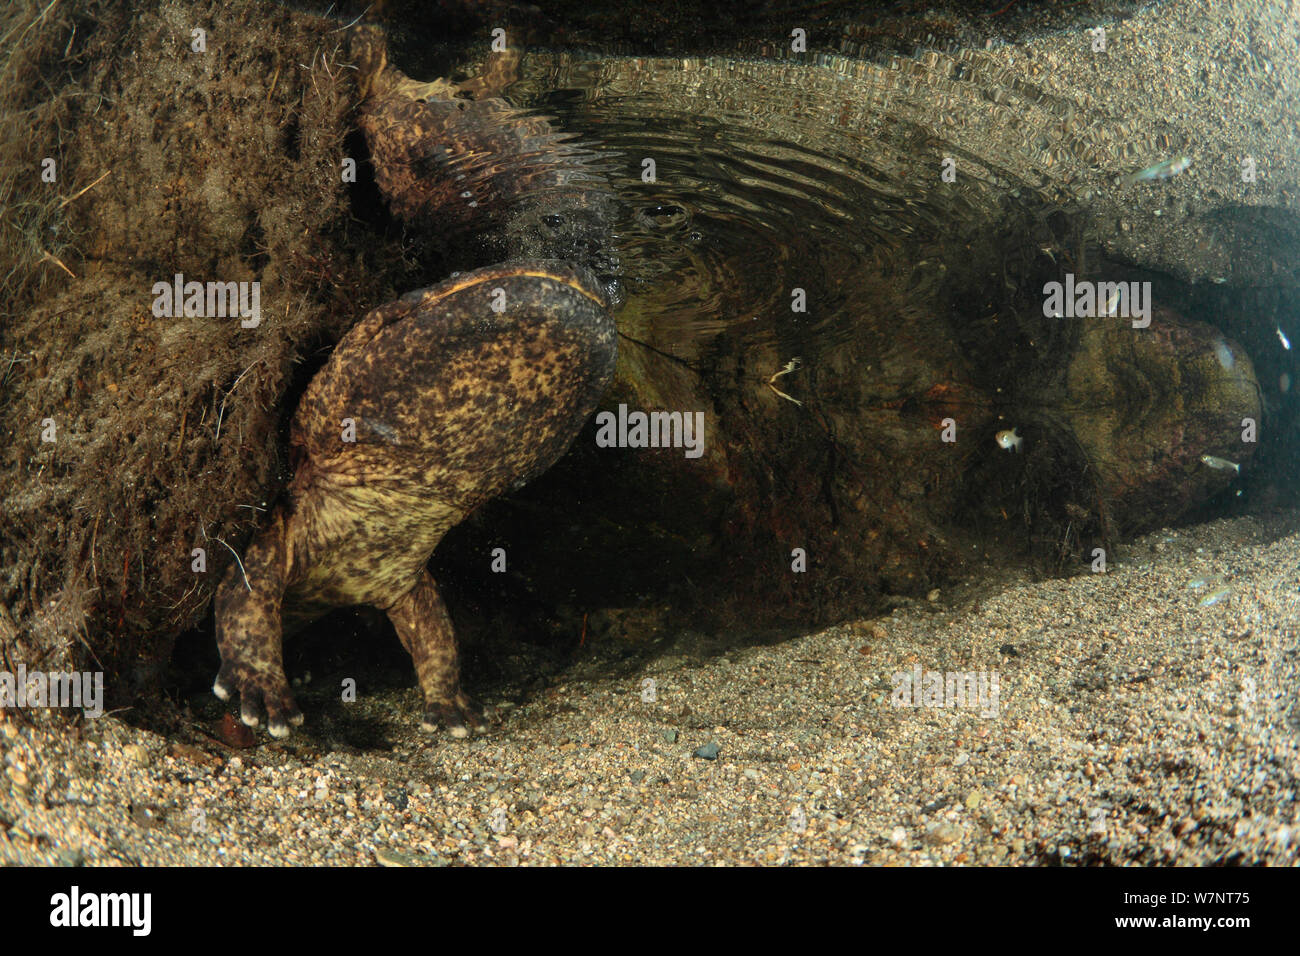 Japanese giant salamander (Andrias japonicus) coming up to breathe for a shorter period during spawning, Hino River, Tottori, Japan, August. Stock Photo